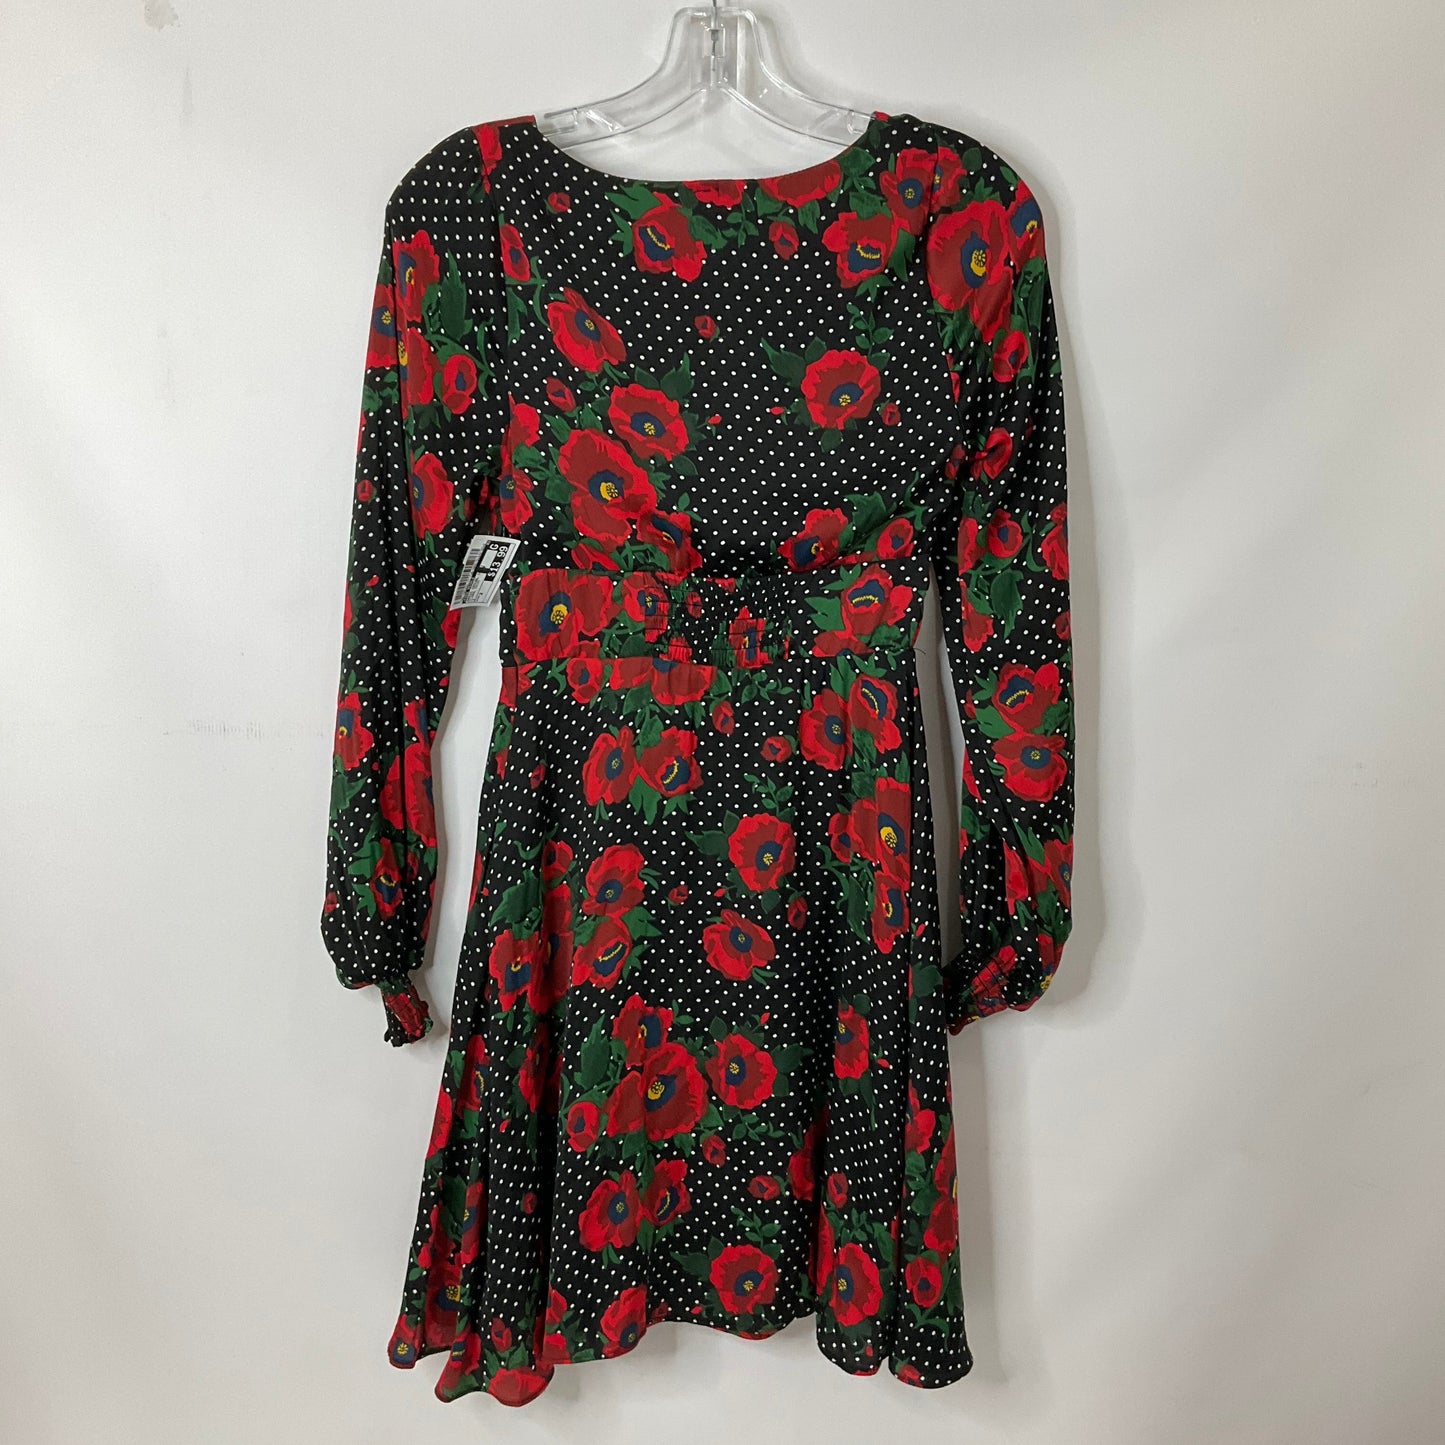 Floral Print Dress Casual Short Free People, Size 2